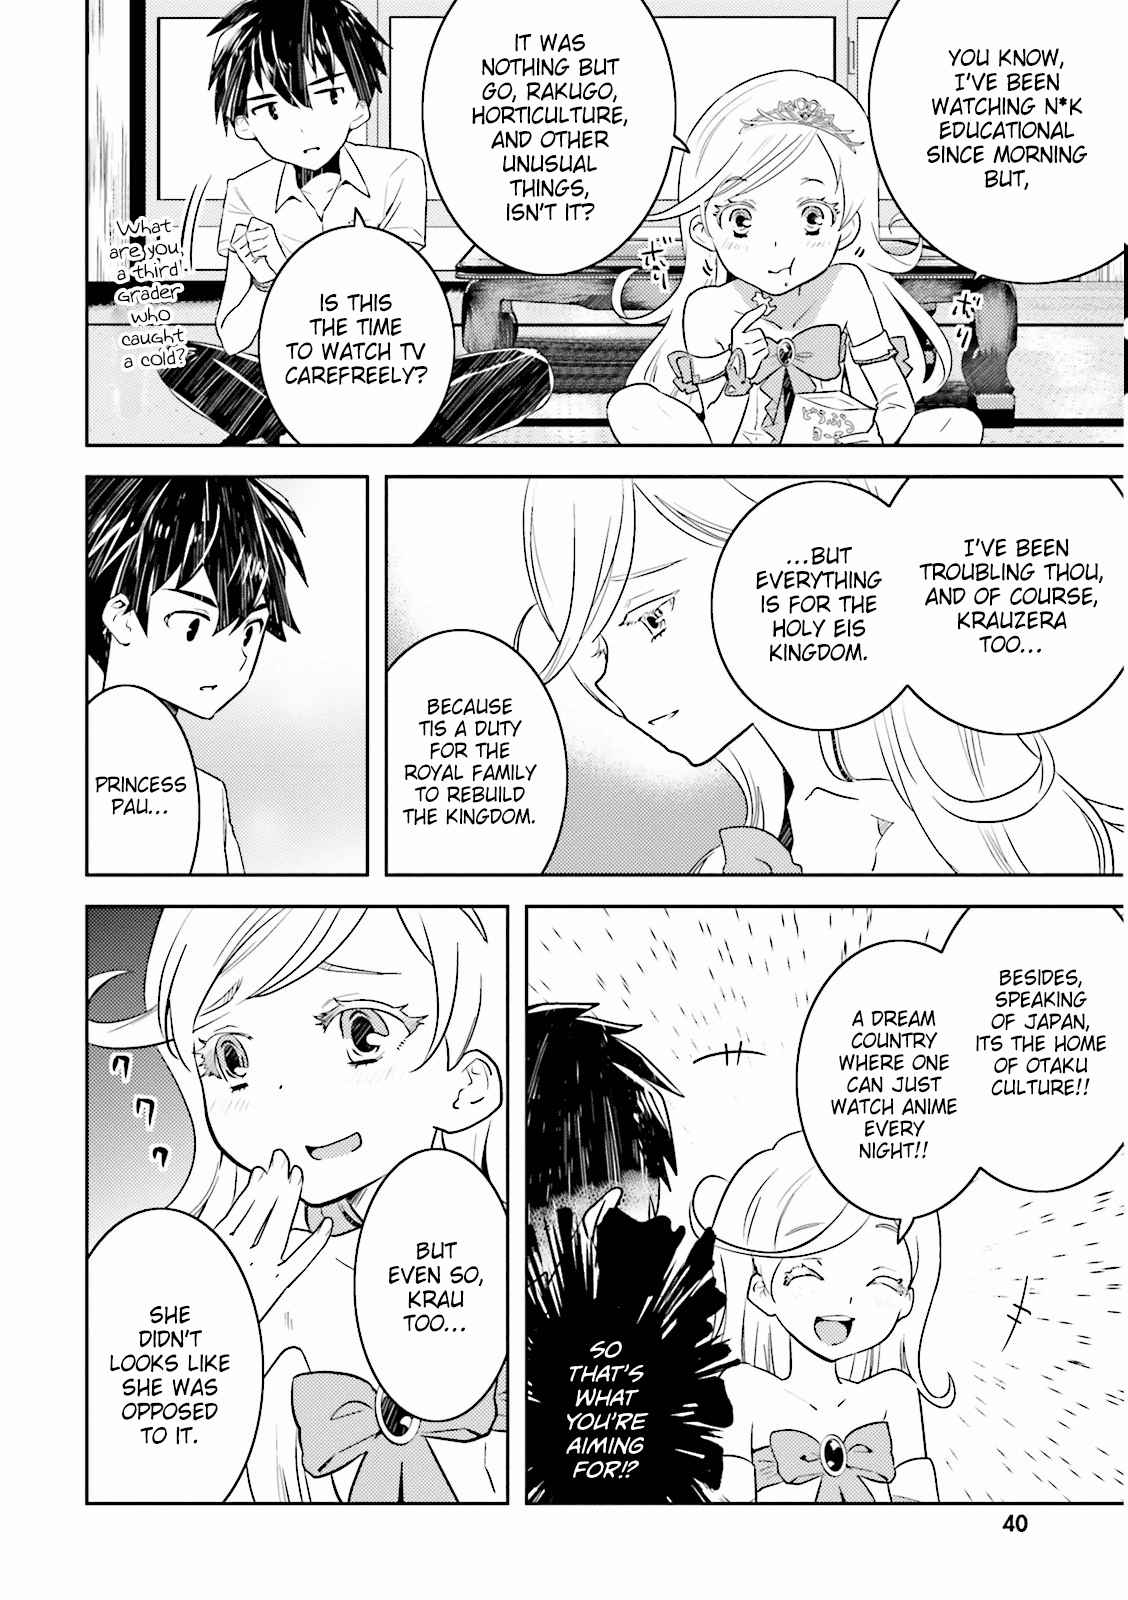 Why not go to JUSCO with me, Valkyrie? Vol. 1 Ch. 3